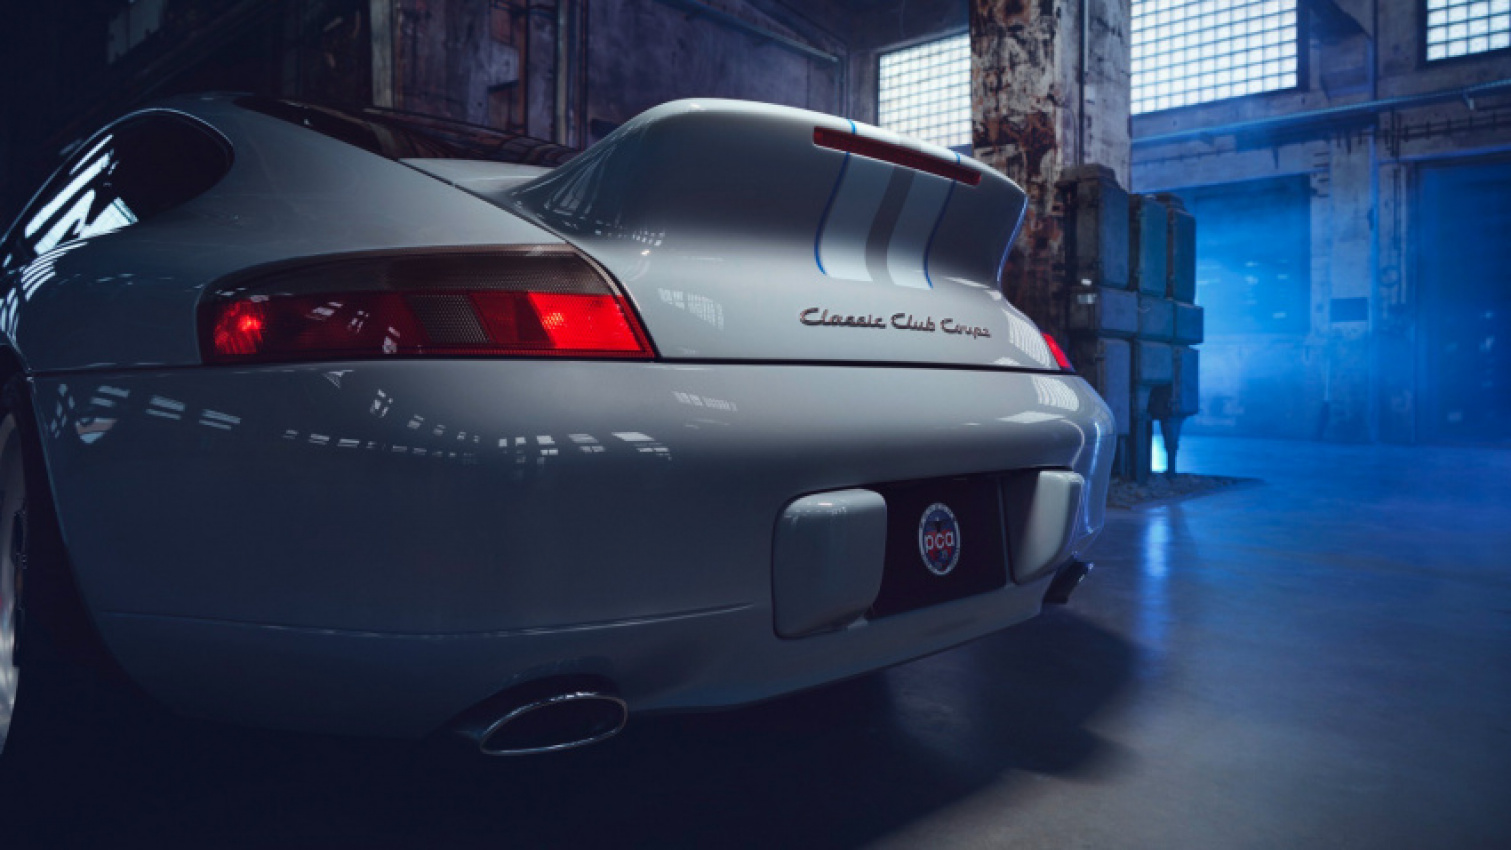 autos, cars, news, porsche, android, porsche 911, porsche 911 gt3, porsche videos, restomod, video, android, porsche’s one-off gt3-powered 911 classic club coupe is the ultimate 996 factory restomod